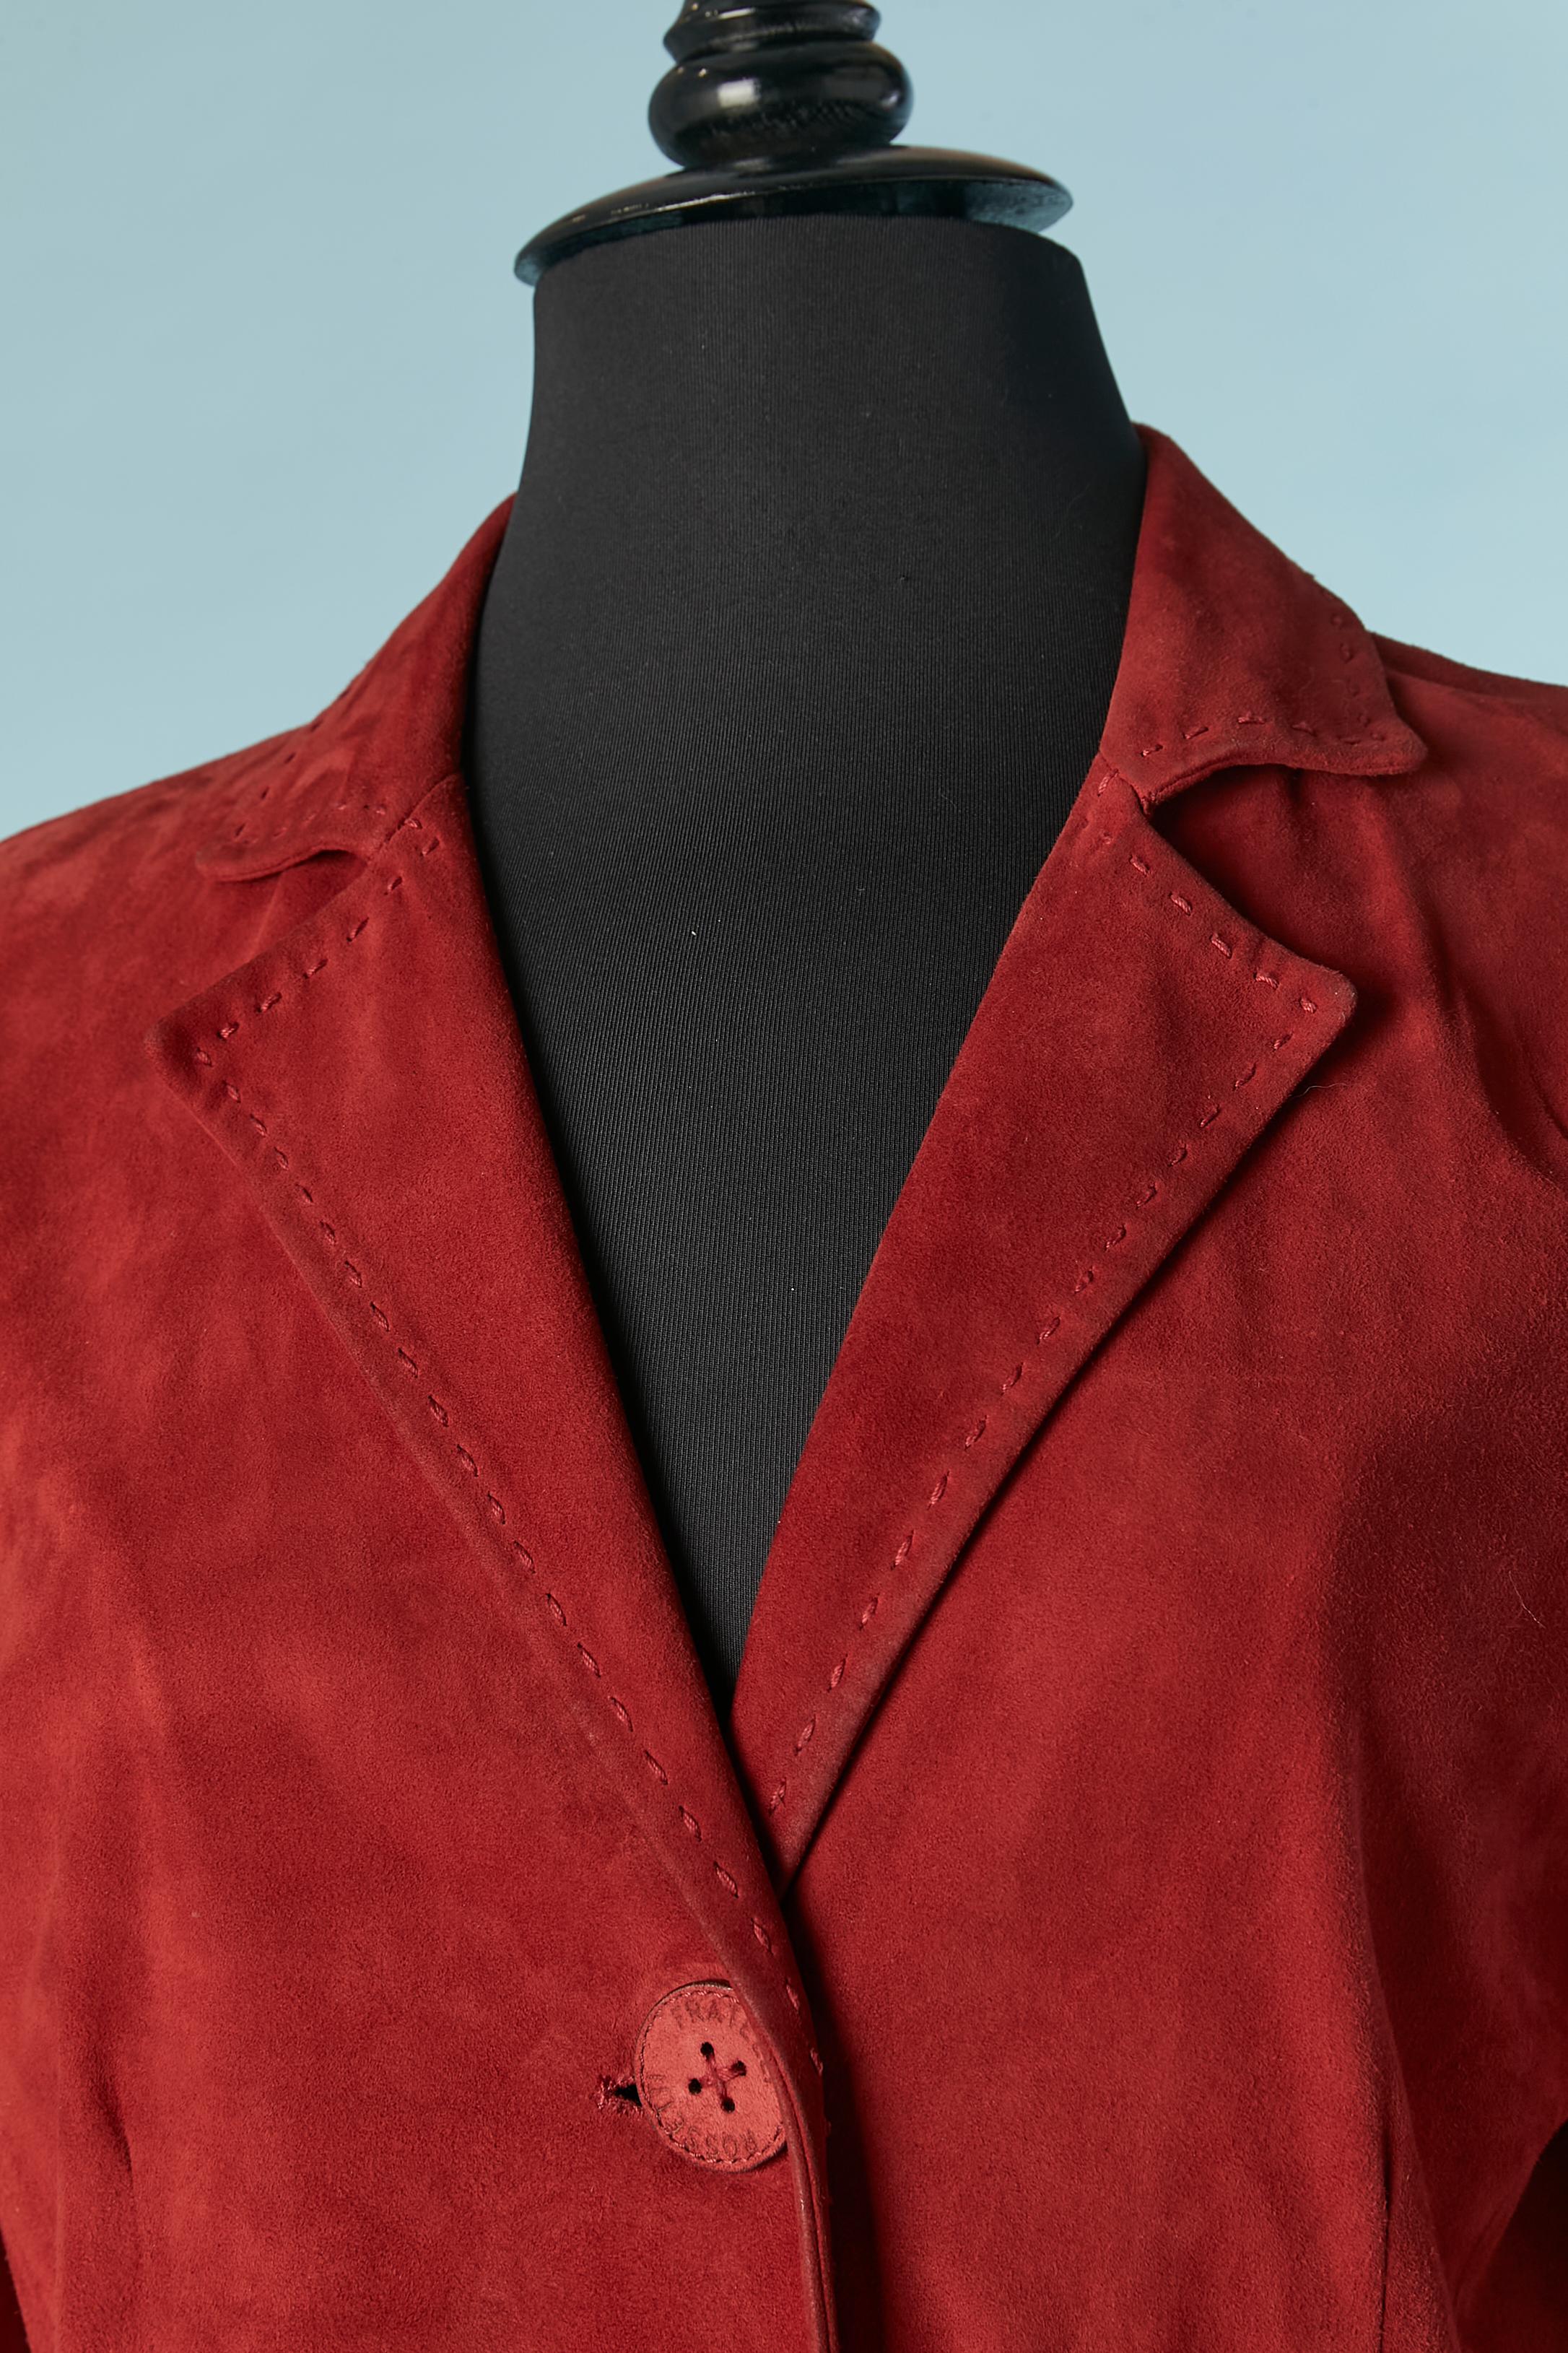 Red suede single breasted coat . Branded suede and leather buttons. Top-stitched, cut-work and pockets on both side with cotton lining. No lining inside the coat.
SIZE 40 / L 